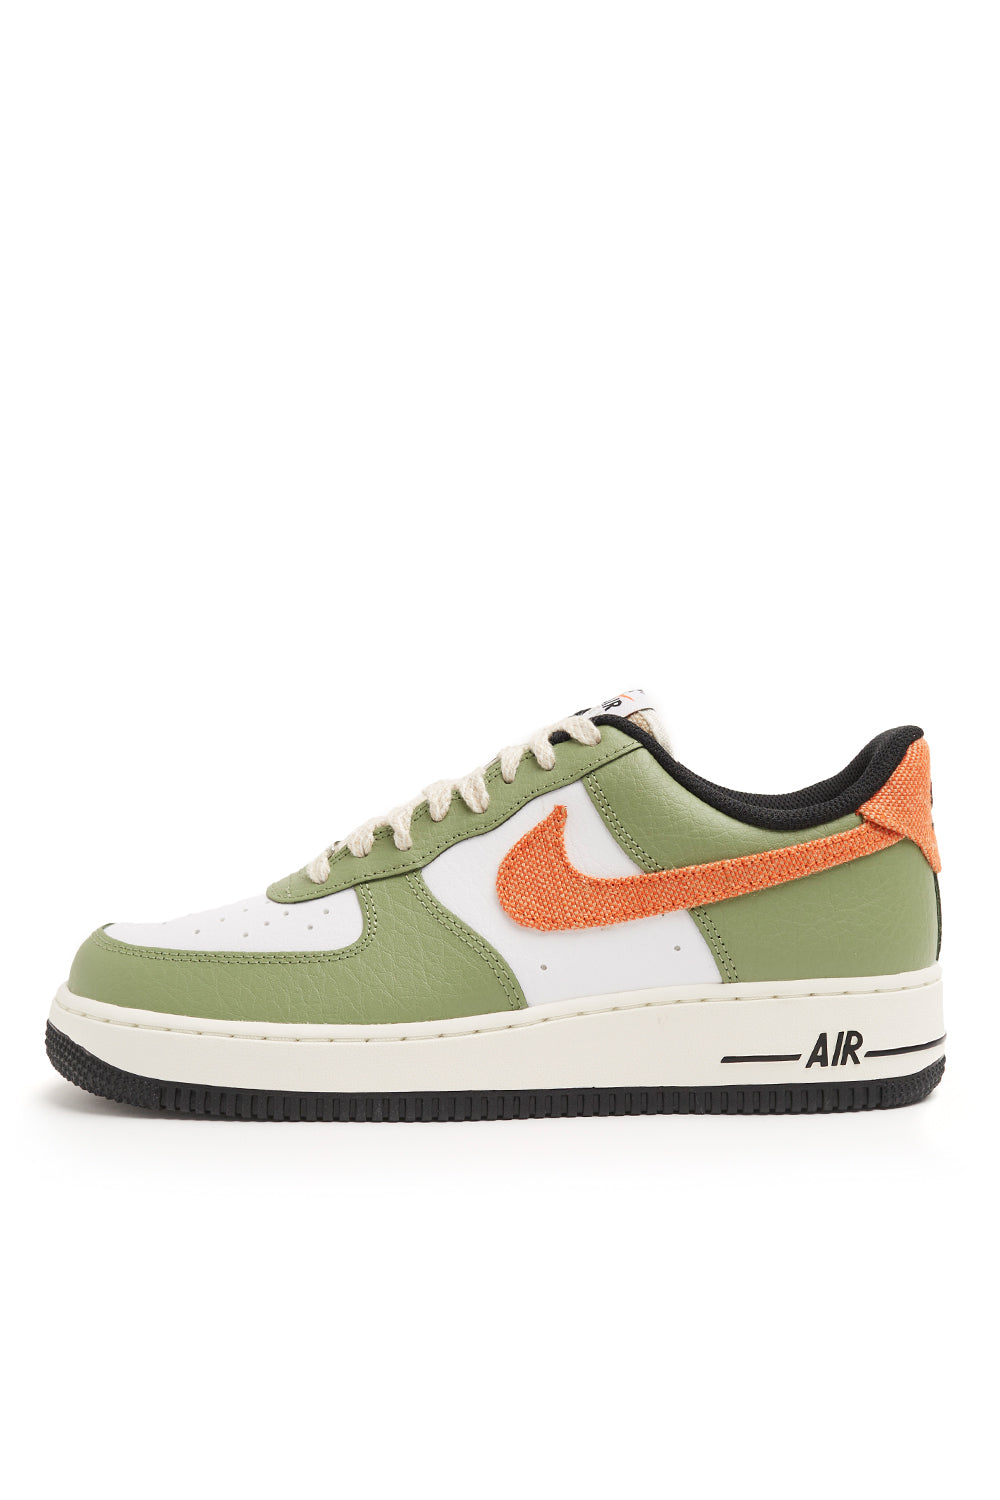 Nike Air Force 1 High Oil Green for Sale, Authenticity Guaranteed